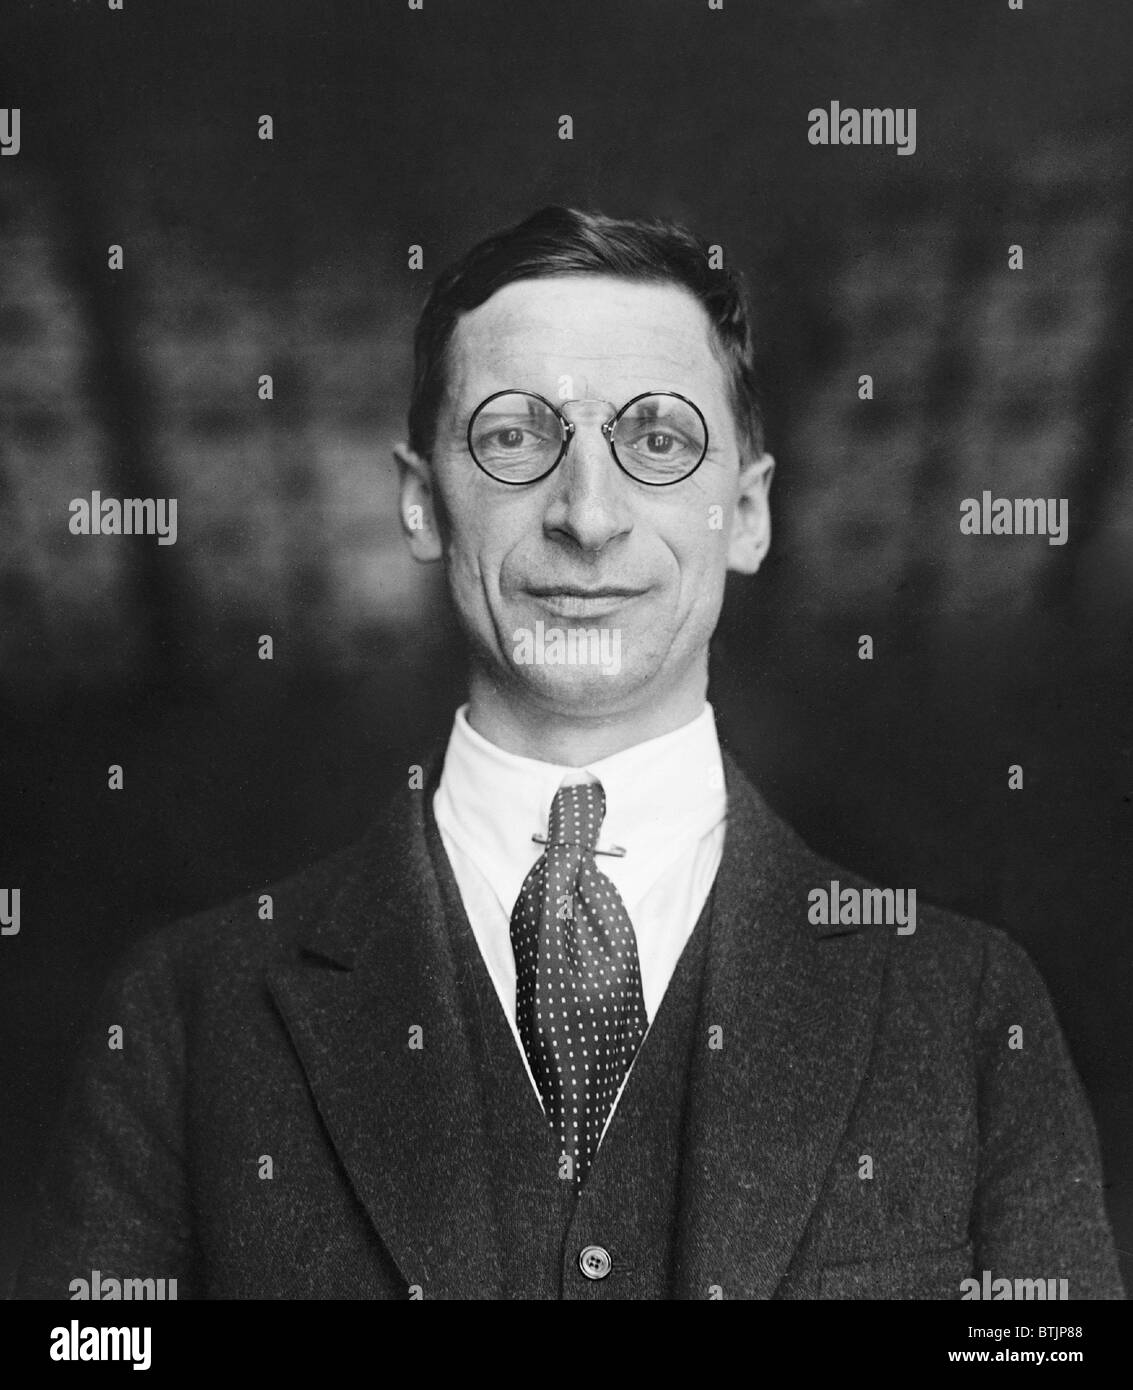 Eamon (Edward) De Valera (1882-1975), was president of Sinn Féin and in the United States to escape jail in Ireland and to raise funds for Irish Freedom in 1919. He returned to Ireland in 1921 and served in various offices, including Taoiseach and President of Ireland. Stock Photo